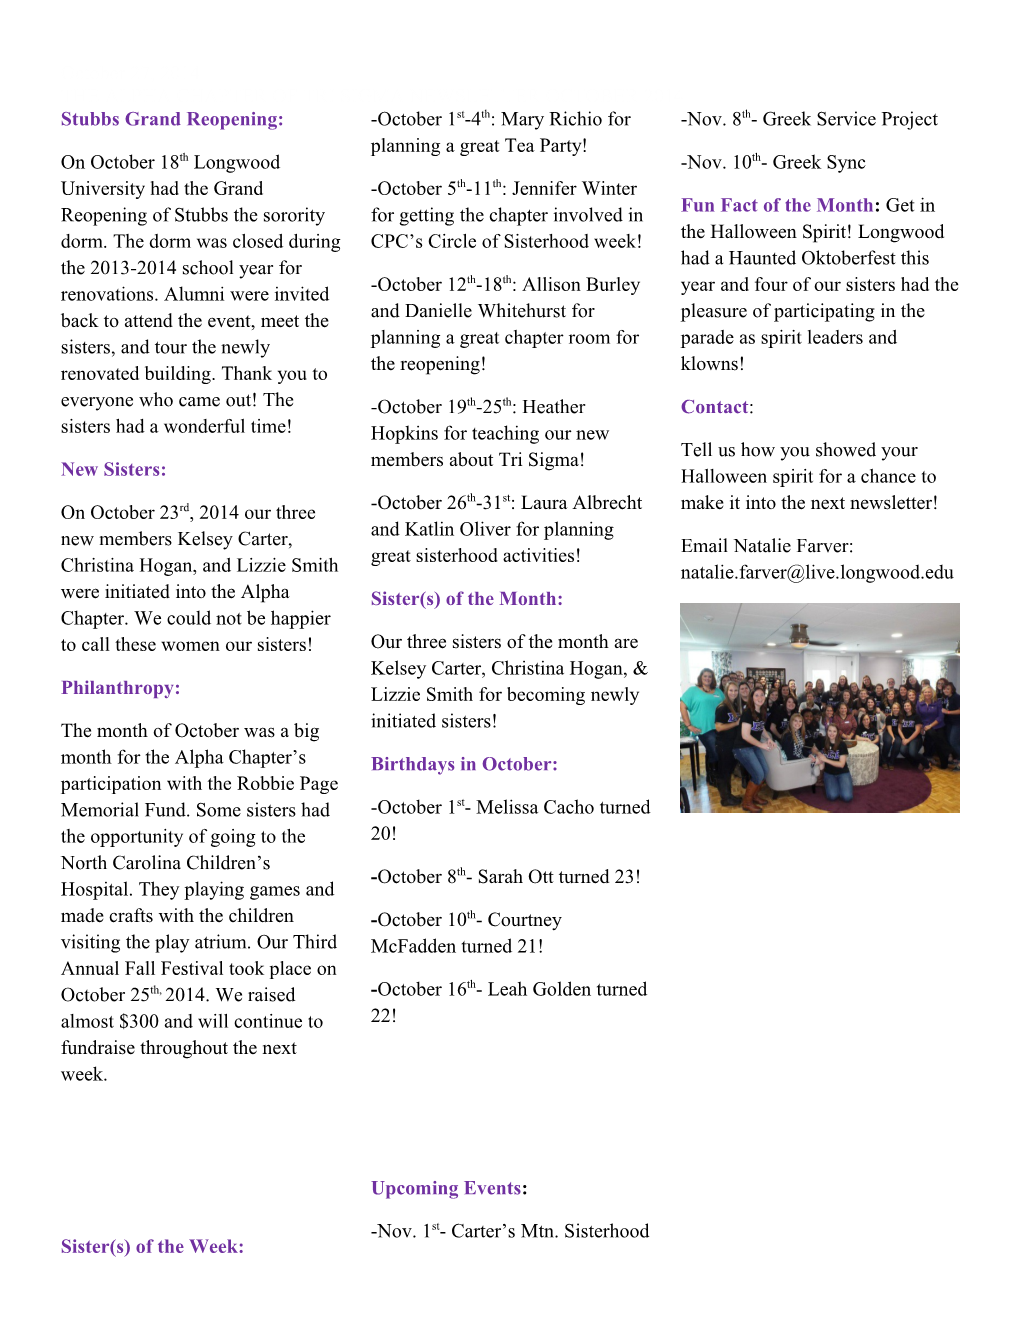 The Alpha Chapter of Tri Sigma Newsletter October 2014